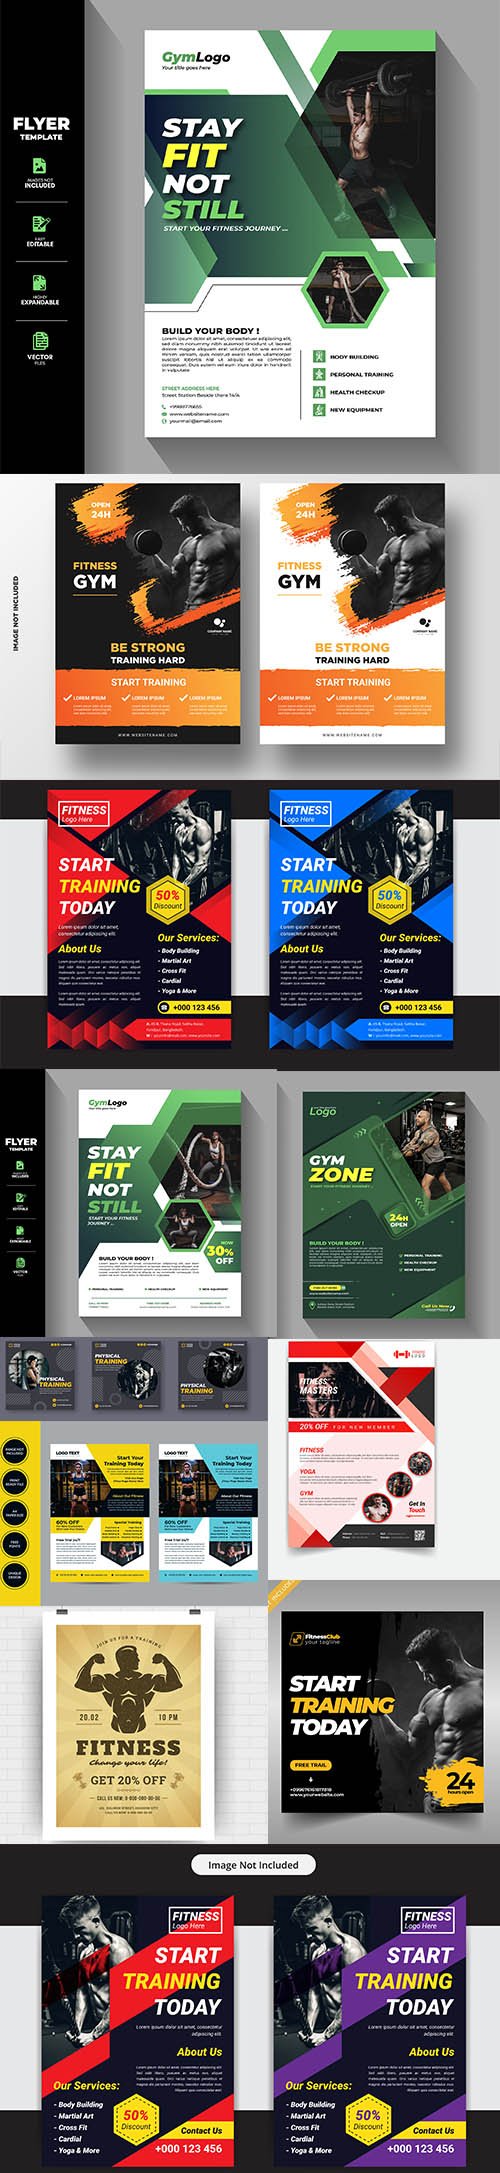 Gym and fitness flyer template collection Vol 2